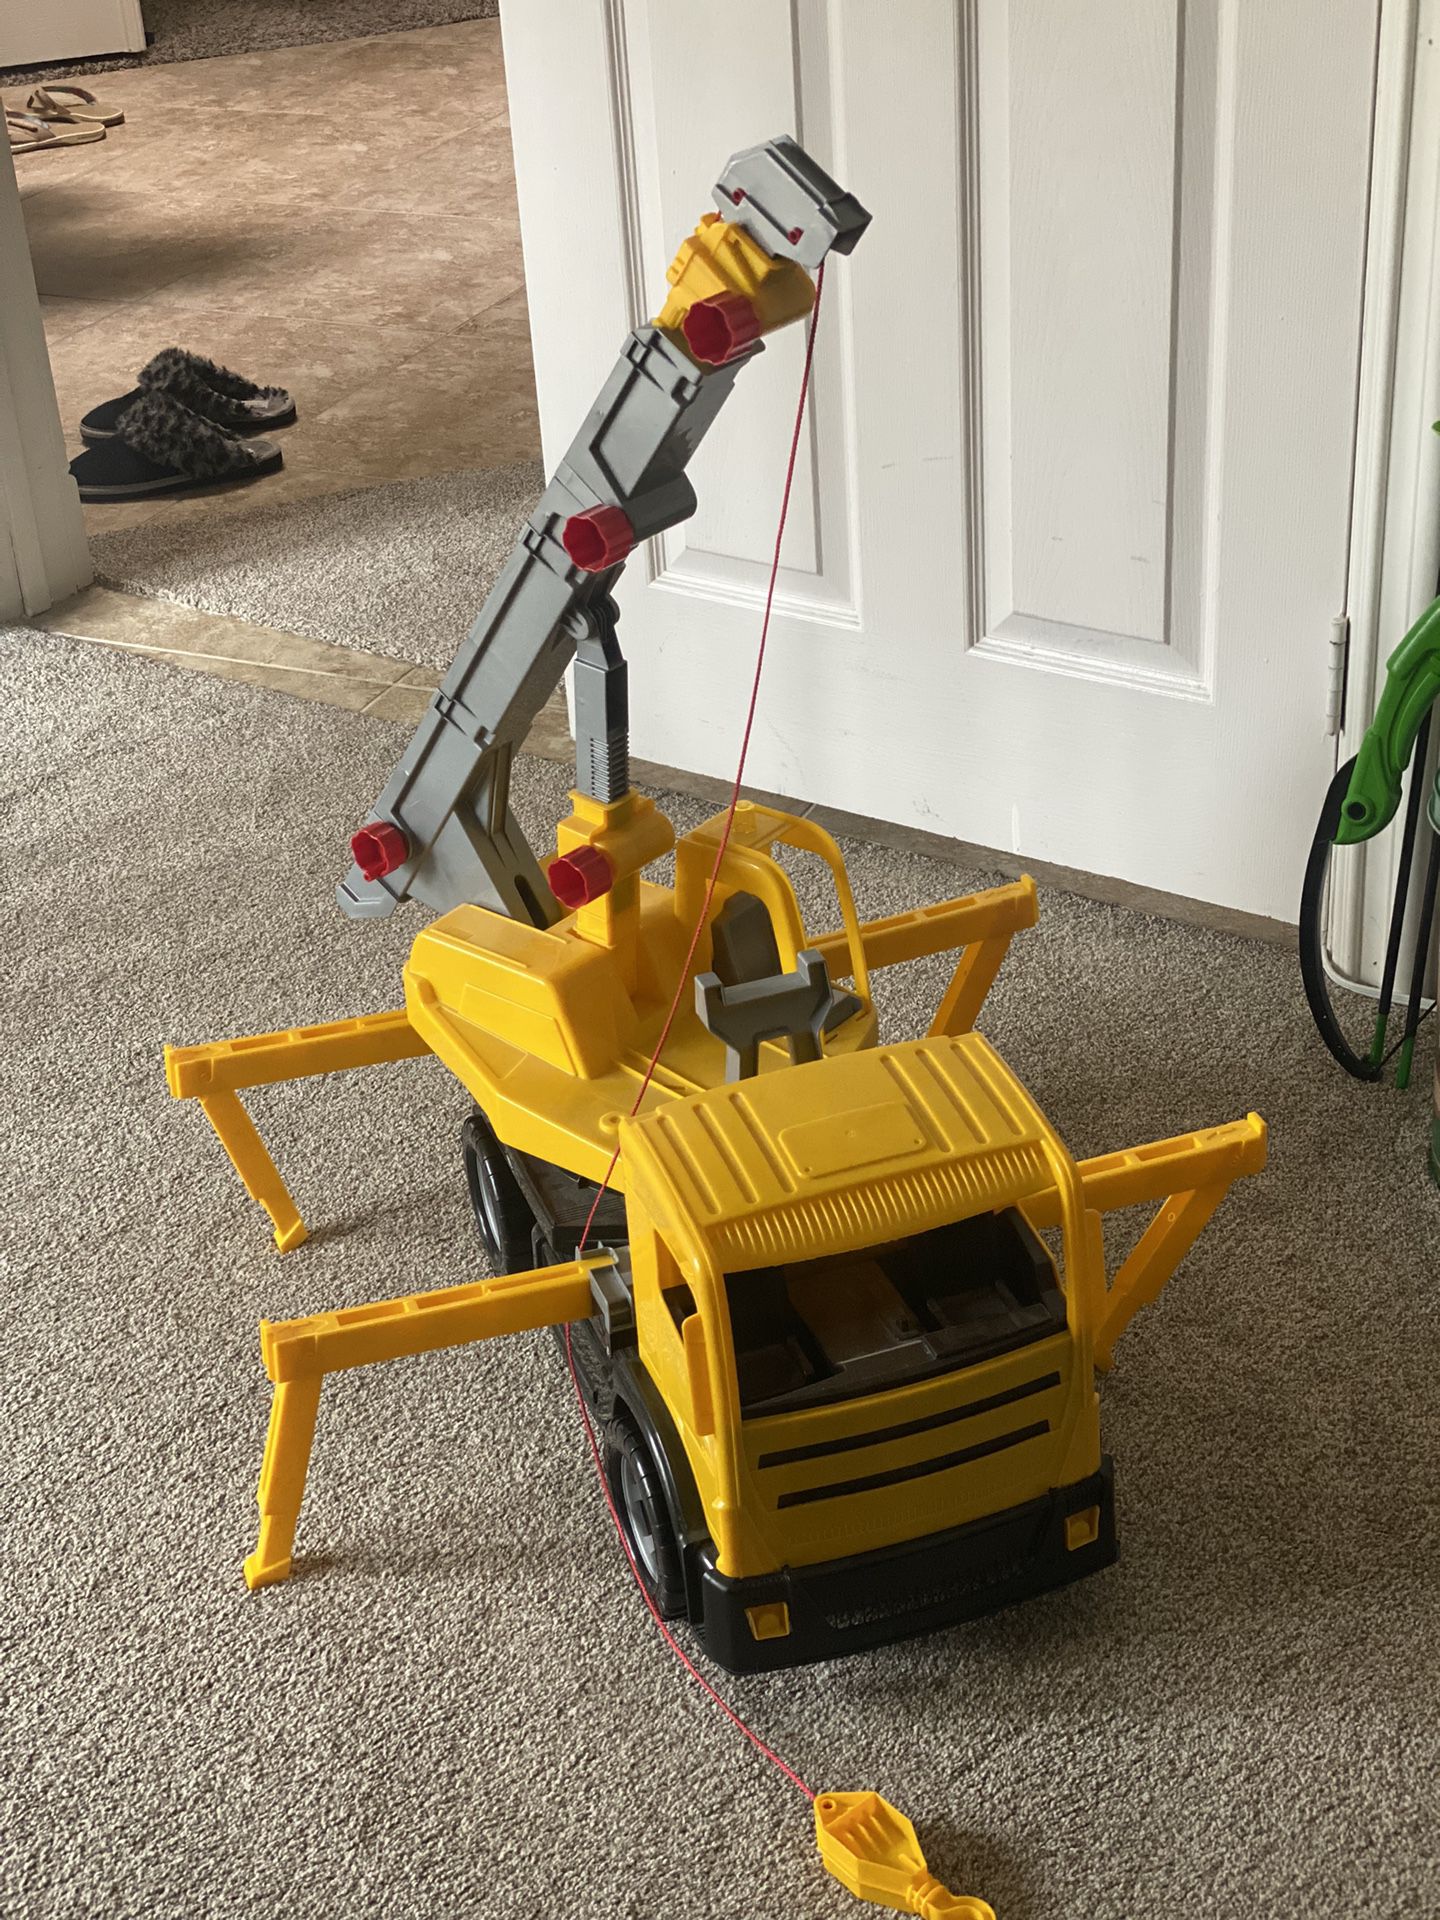 Toddler Giant Toy Crane Truck 